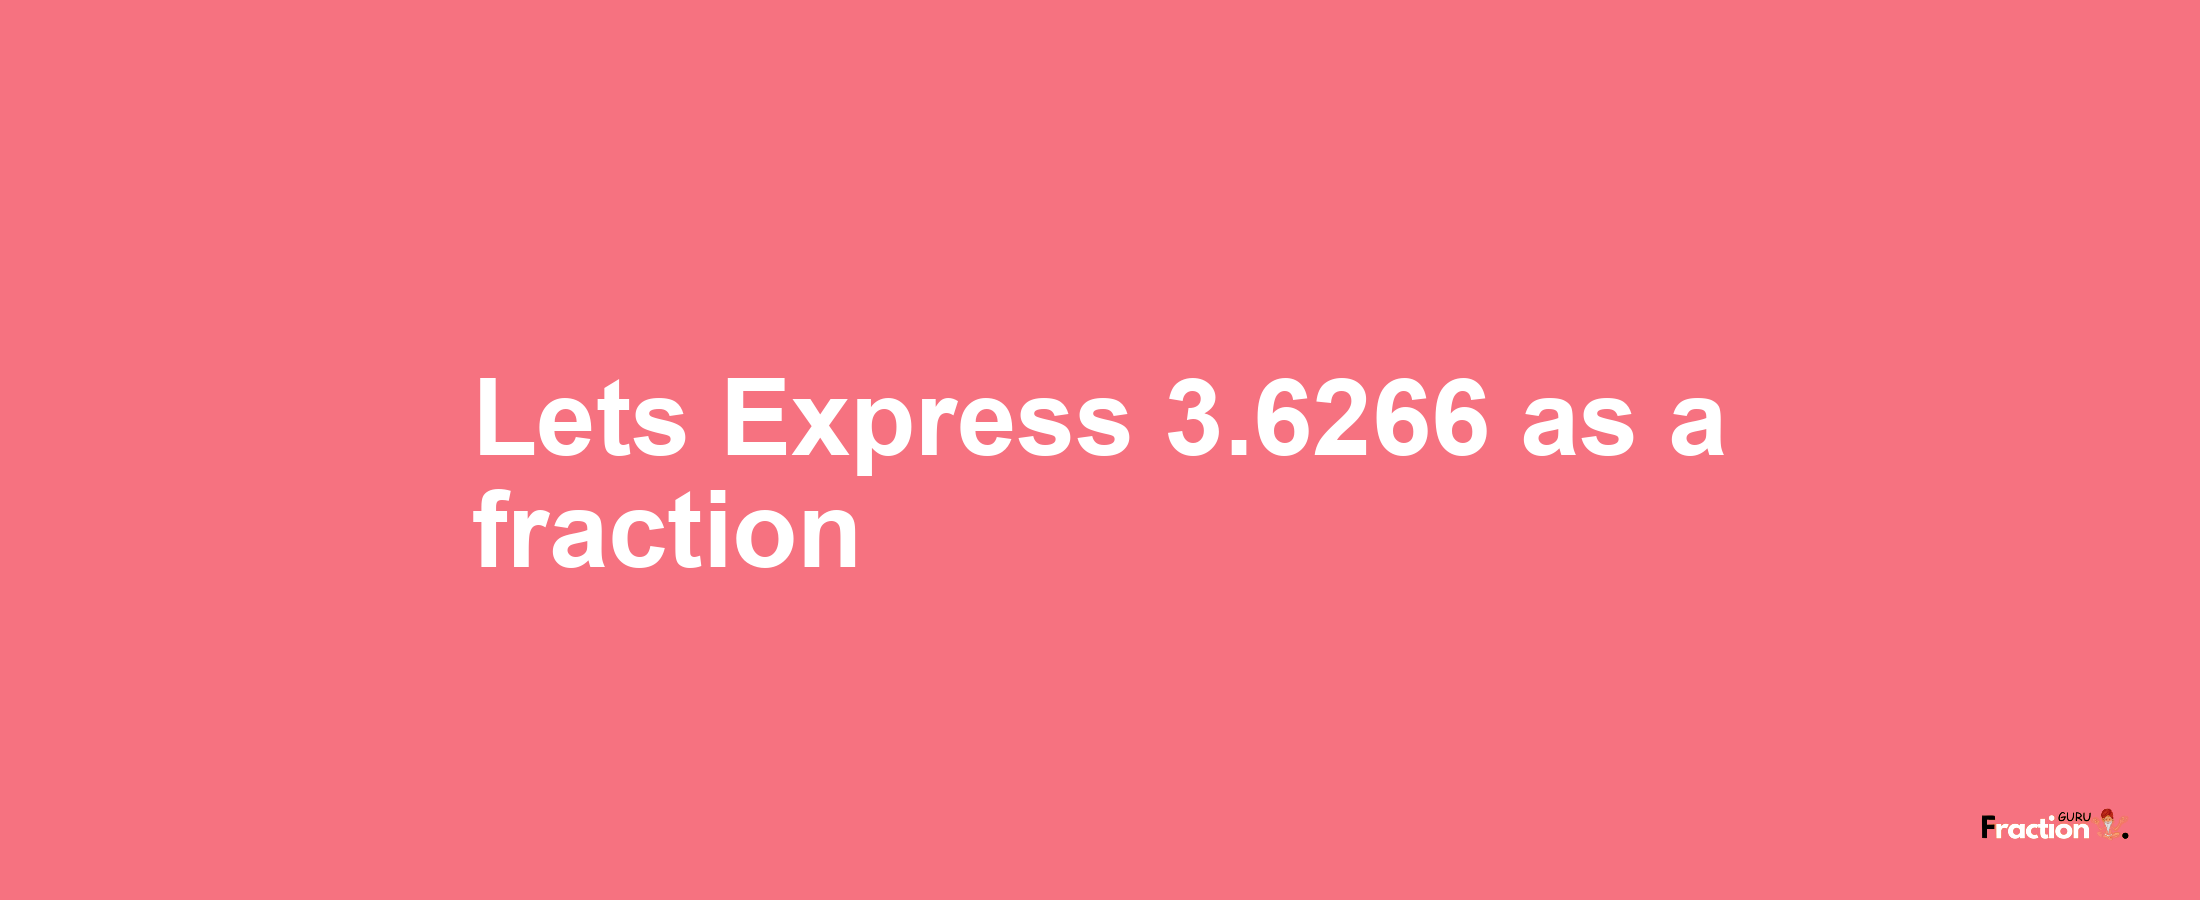 Lets Express 3.6266 as afraction